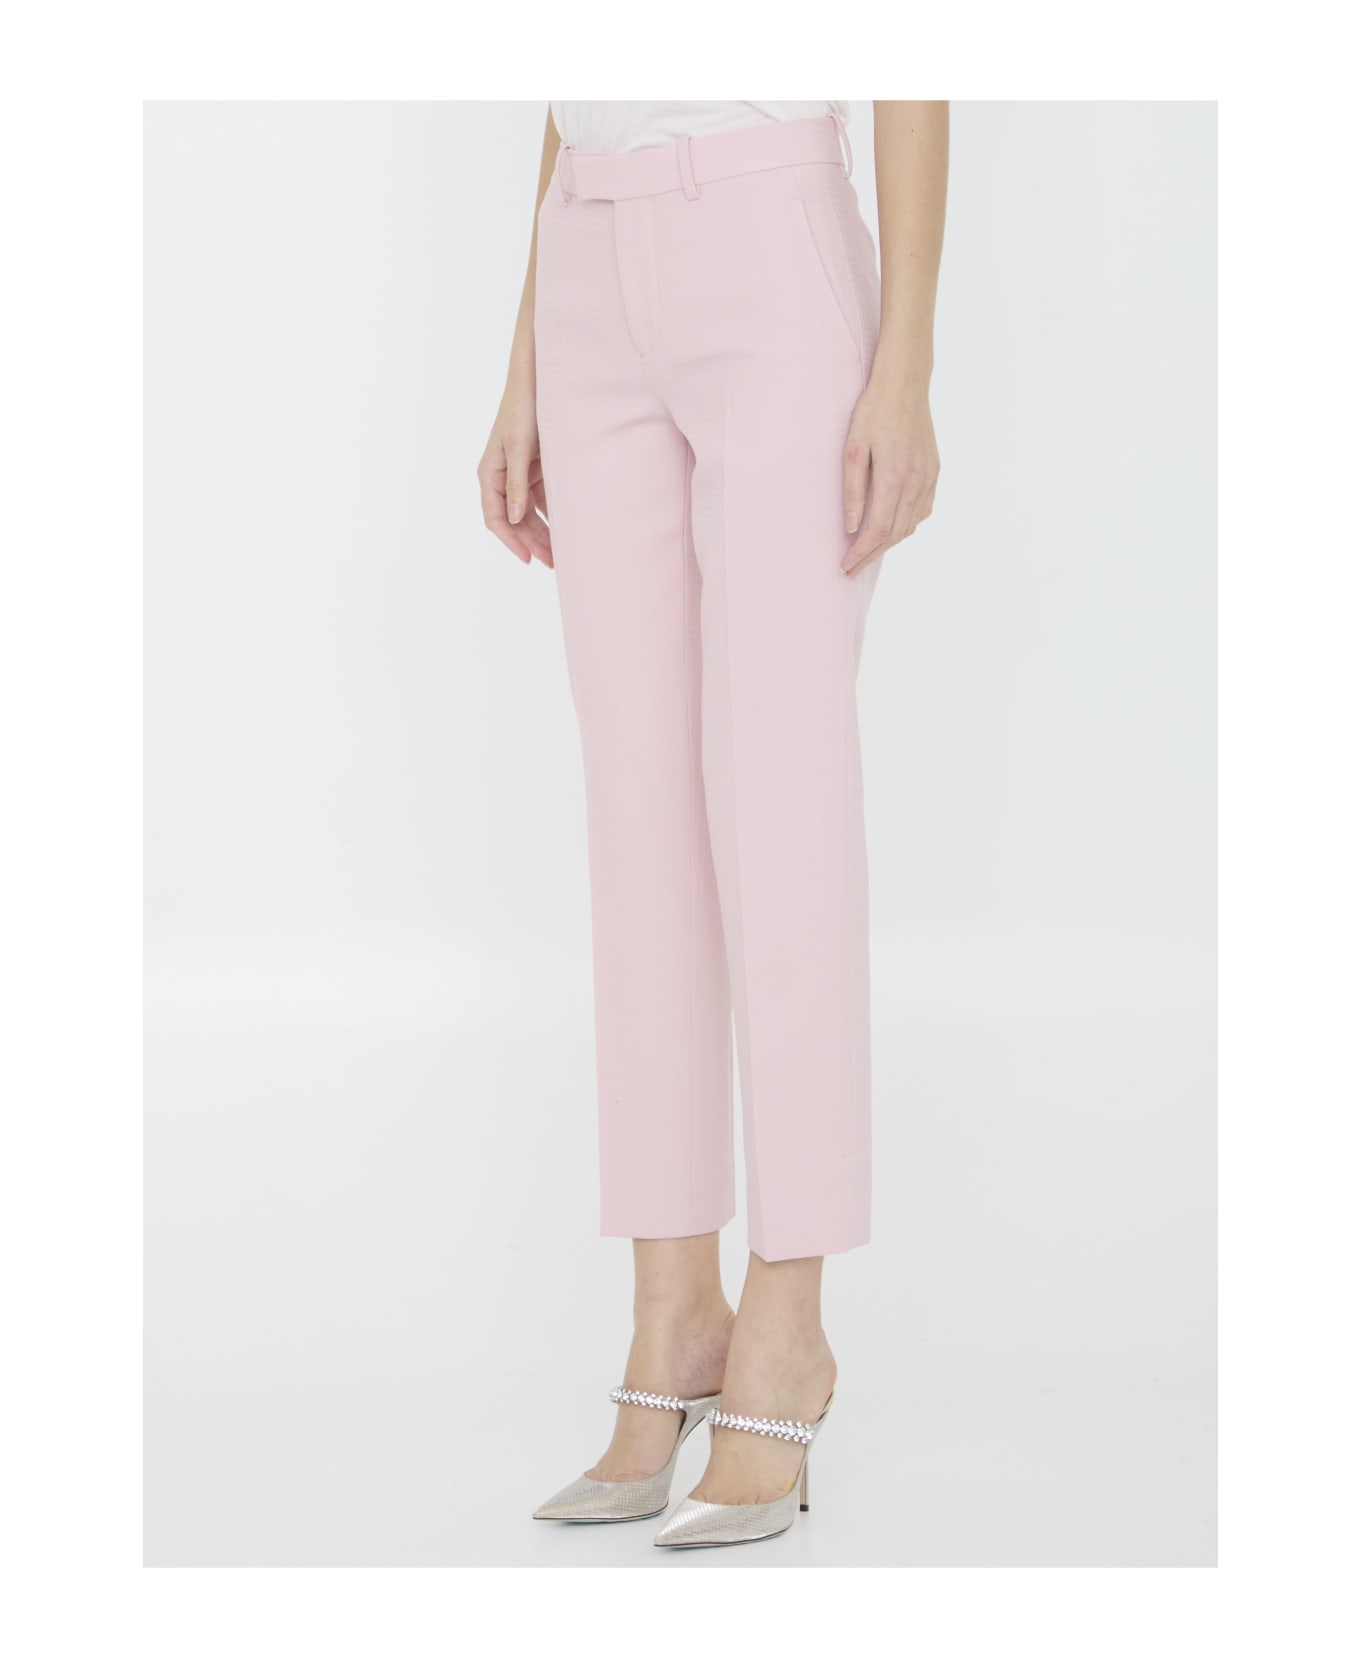 Burberry Wool Tailored Trousers - Cameo